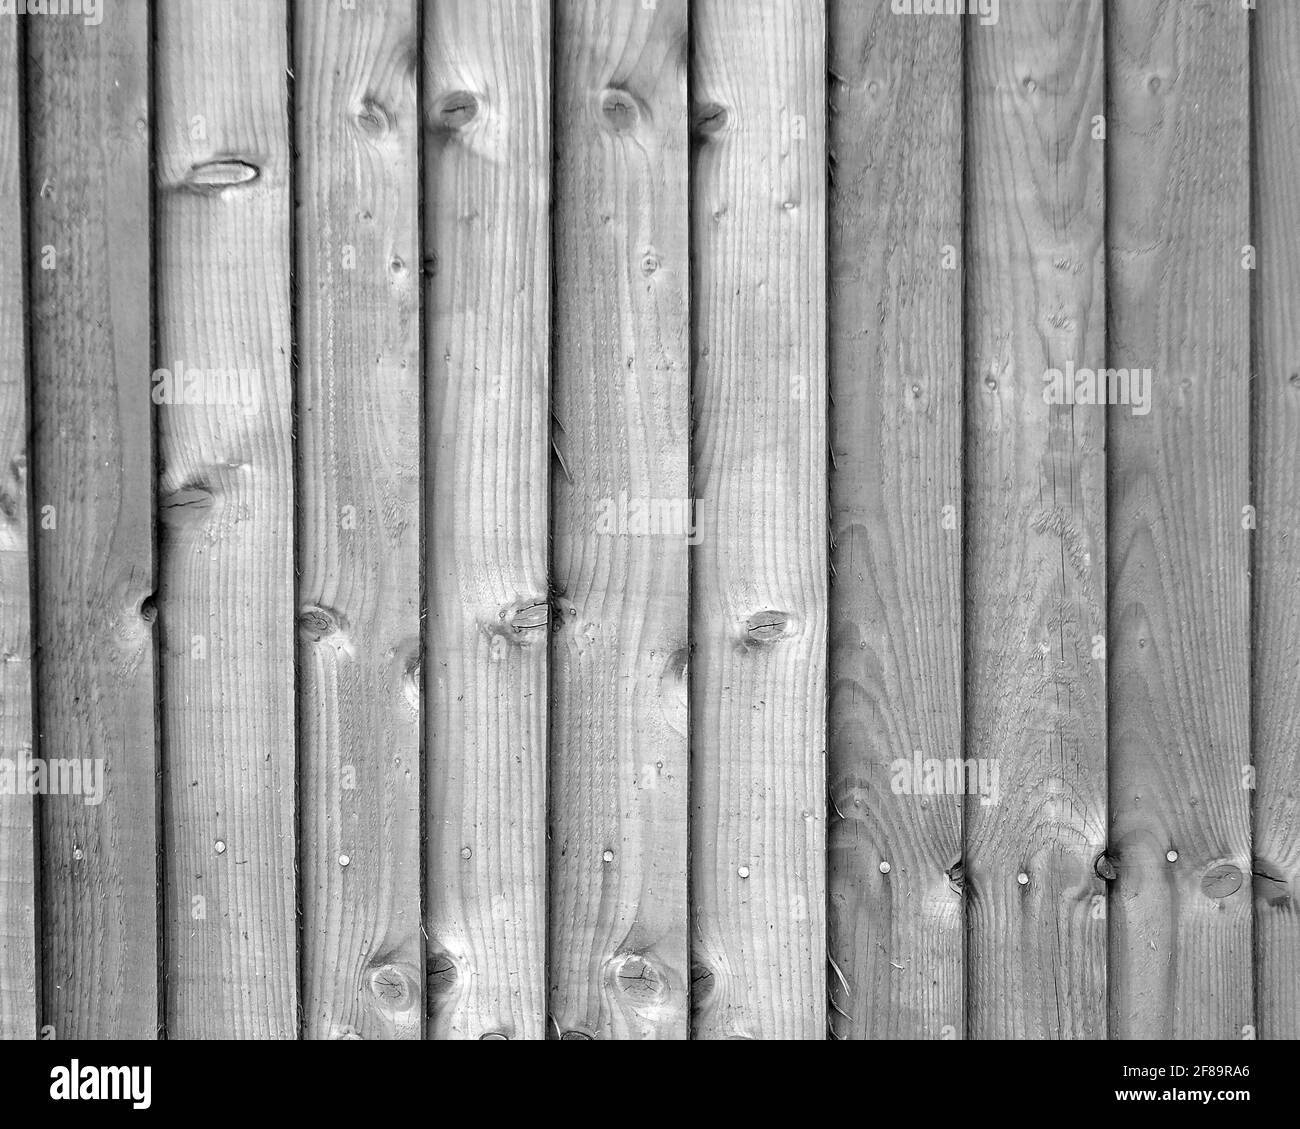 April 2021 - Wood texture for background or texture Stock Photo